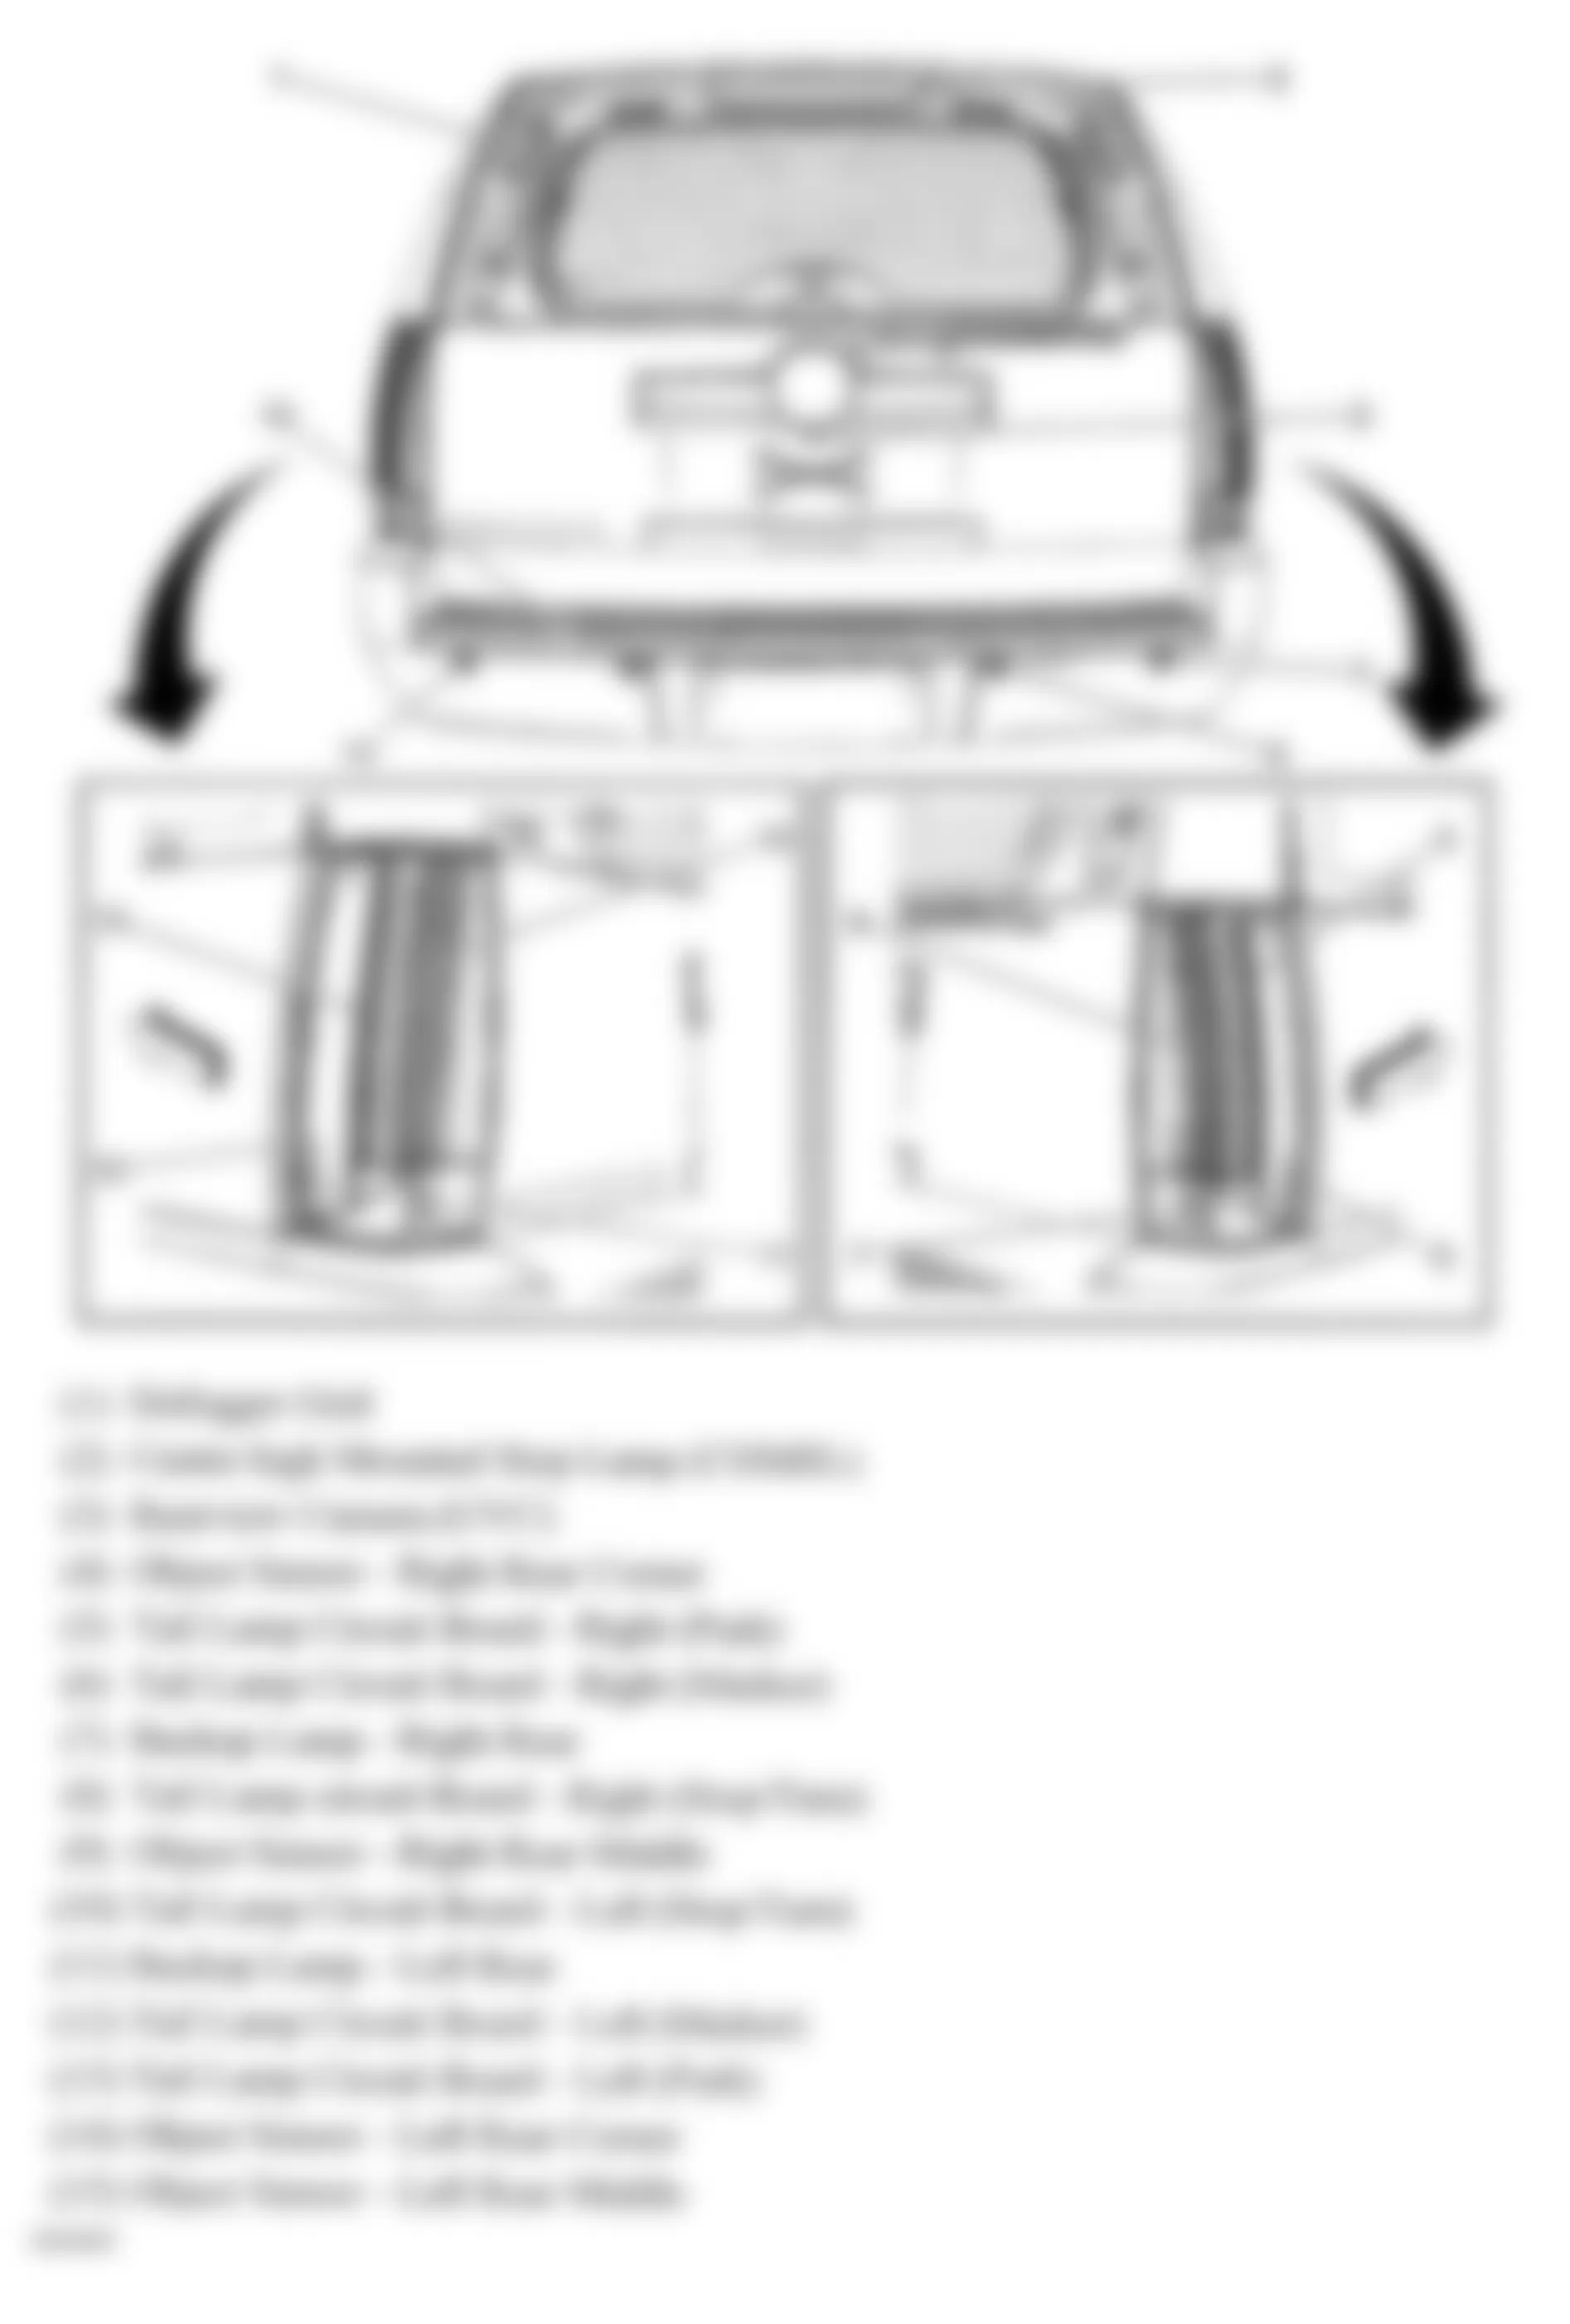 GMC Yukon Denali 2007 - Component Locations -  Rear Of Vehicle (Tahoe & Escalade W/One Piece Liftgate)